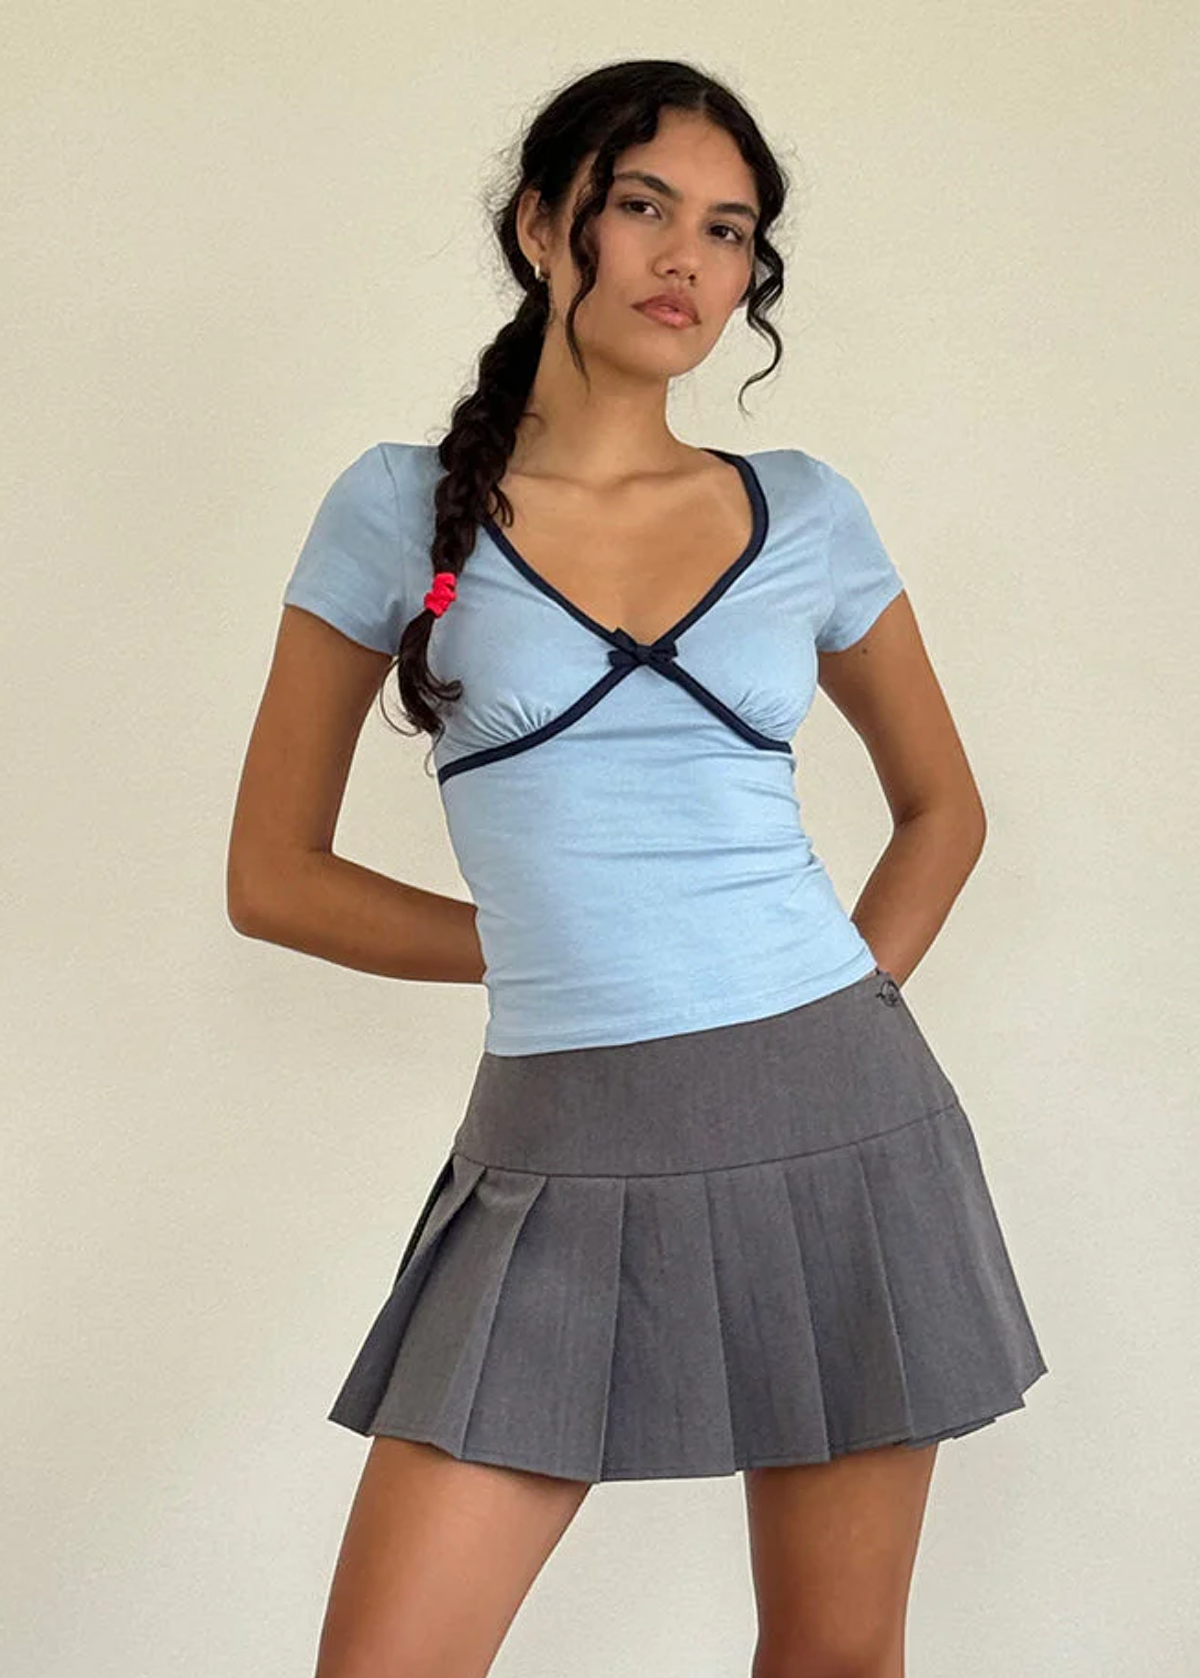 Baby Blue top with navy binding and bow by Motel Rocks